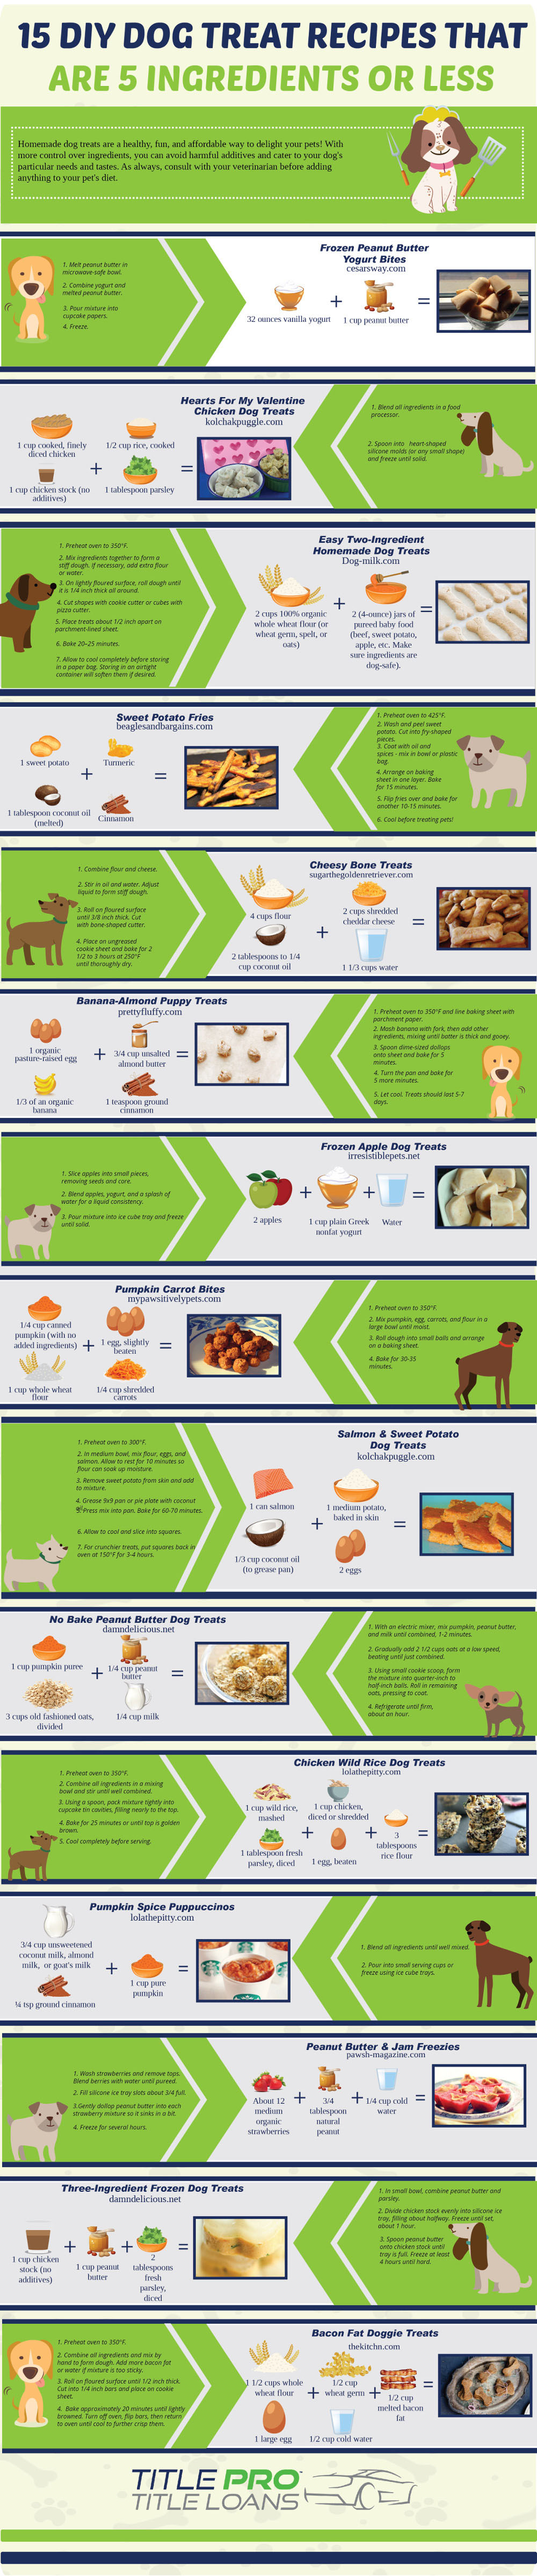 DIY Dog Treat Recipes That Are 5 Ingredients or Less